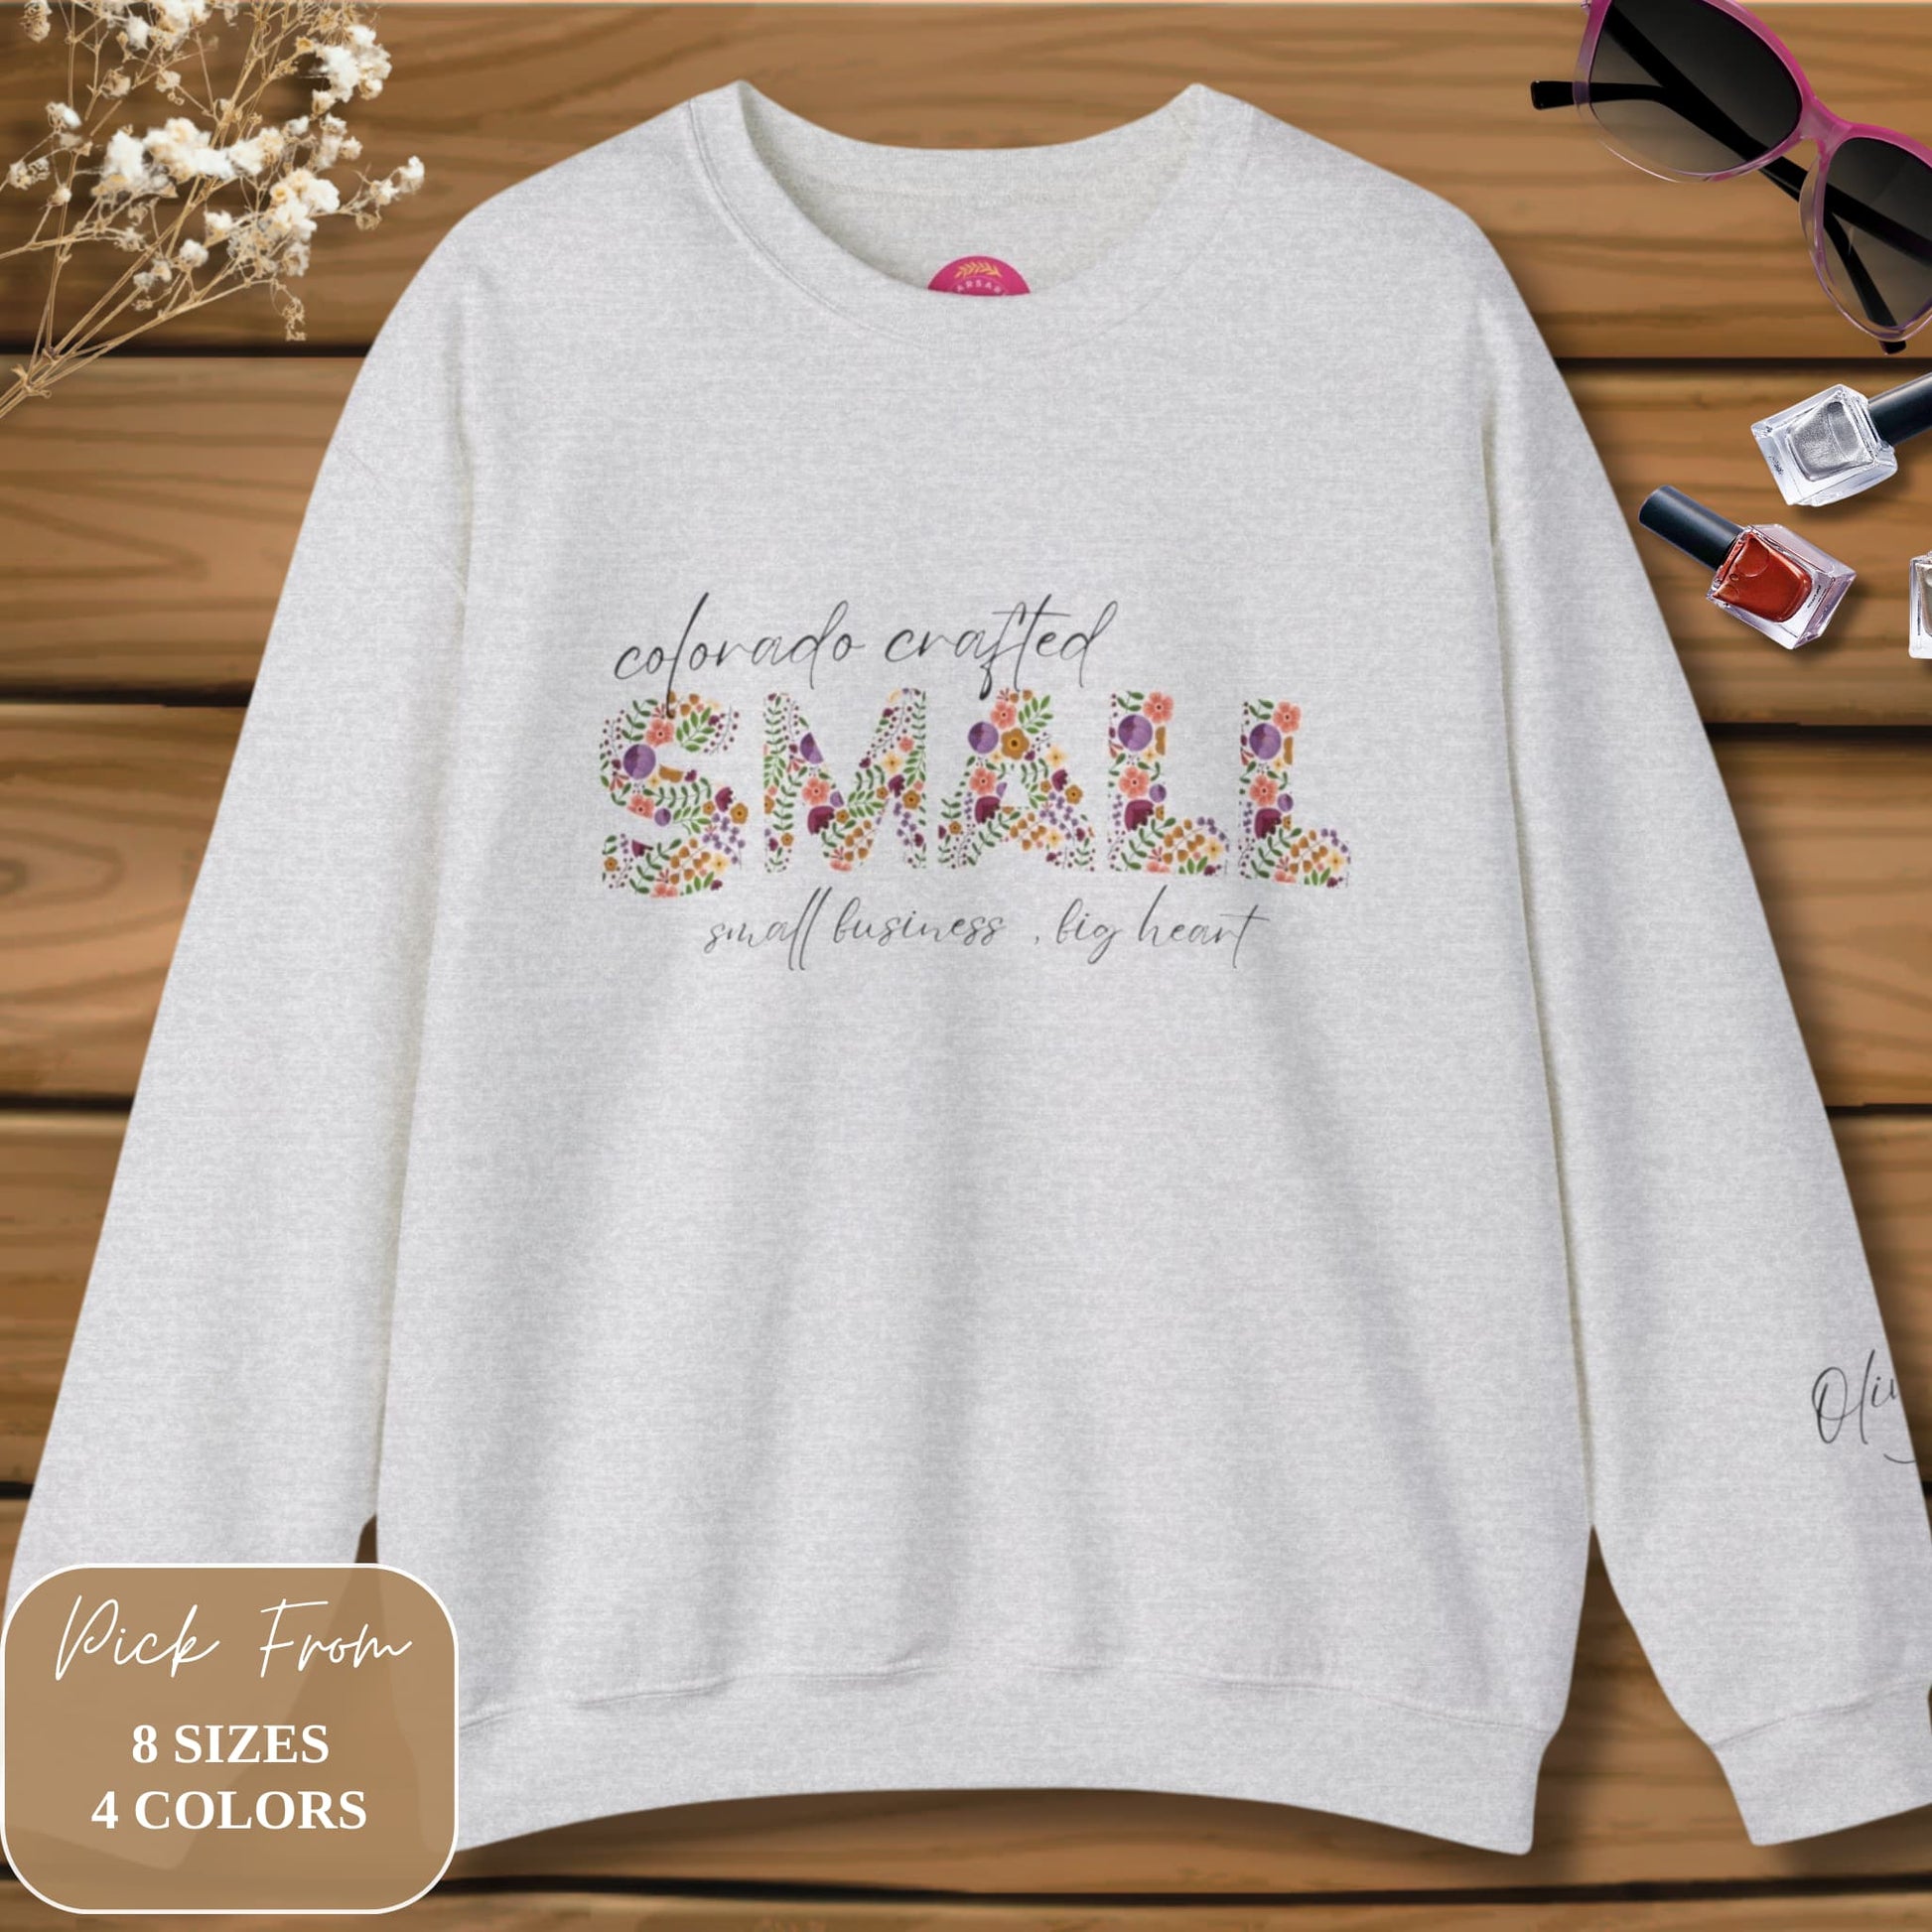 Custom Colorado Crewneck Sweatshirt in Pink Laid on Wooden Background with Stylish Women's Accessories.